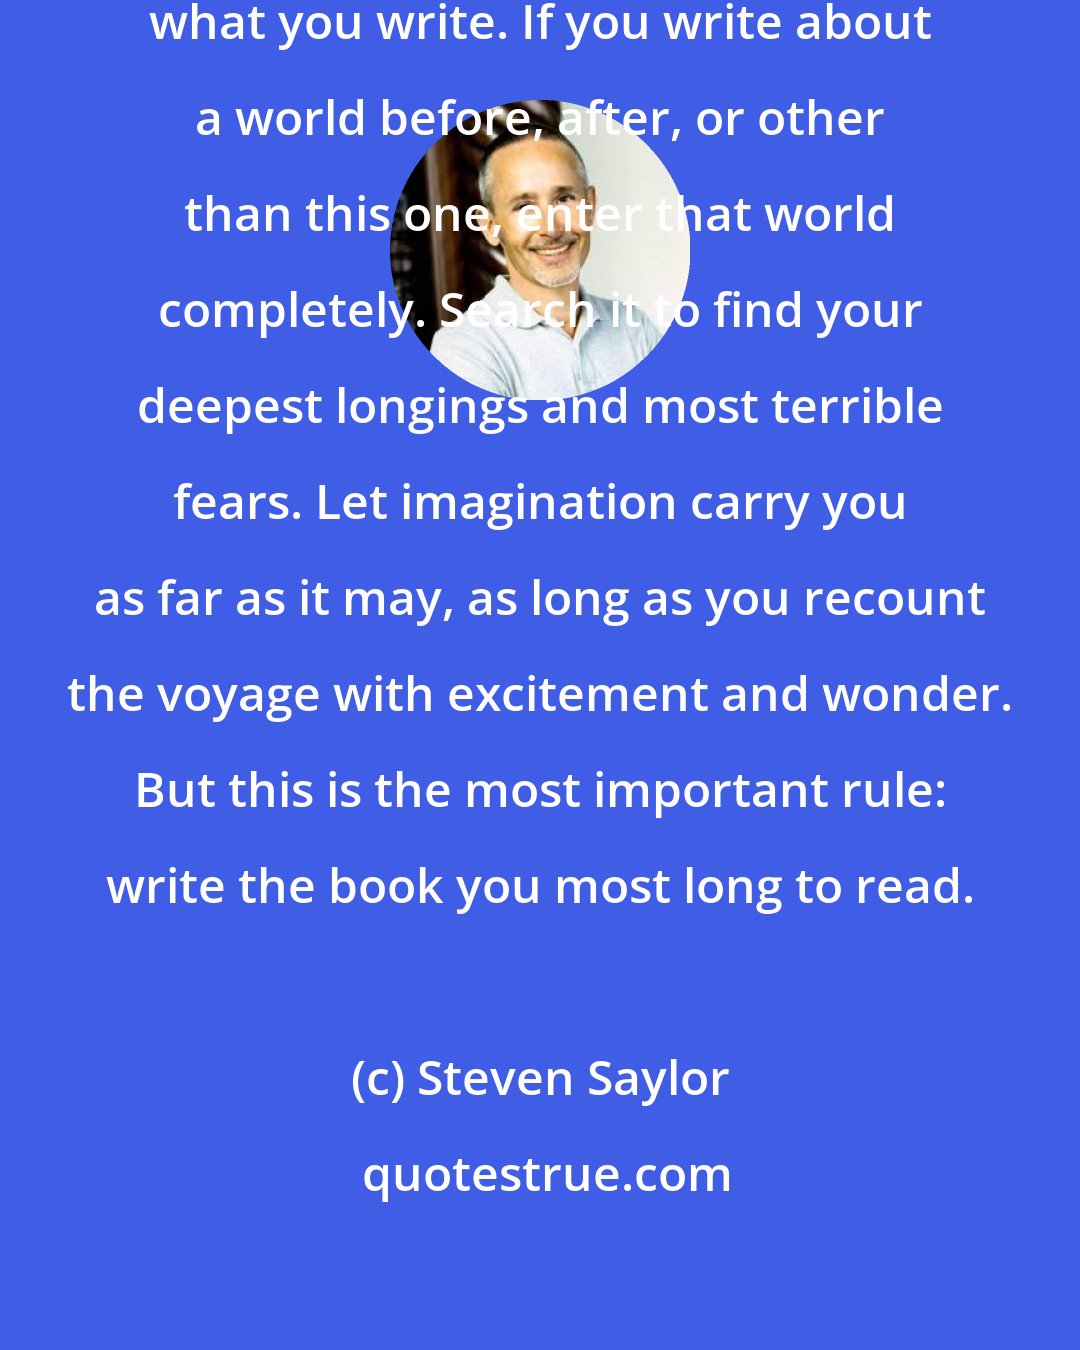 Steven Saylor: Not write what you know, but know what you write. If you write about a world before, after, or other than this one, enter that world completely. Search it to find your deepest longings and most terrible fears. Let imagination carry you as far as it may, as long as you recount the voyage with excitement and wonder. But this is the most important rule: write the book you most long to read.